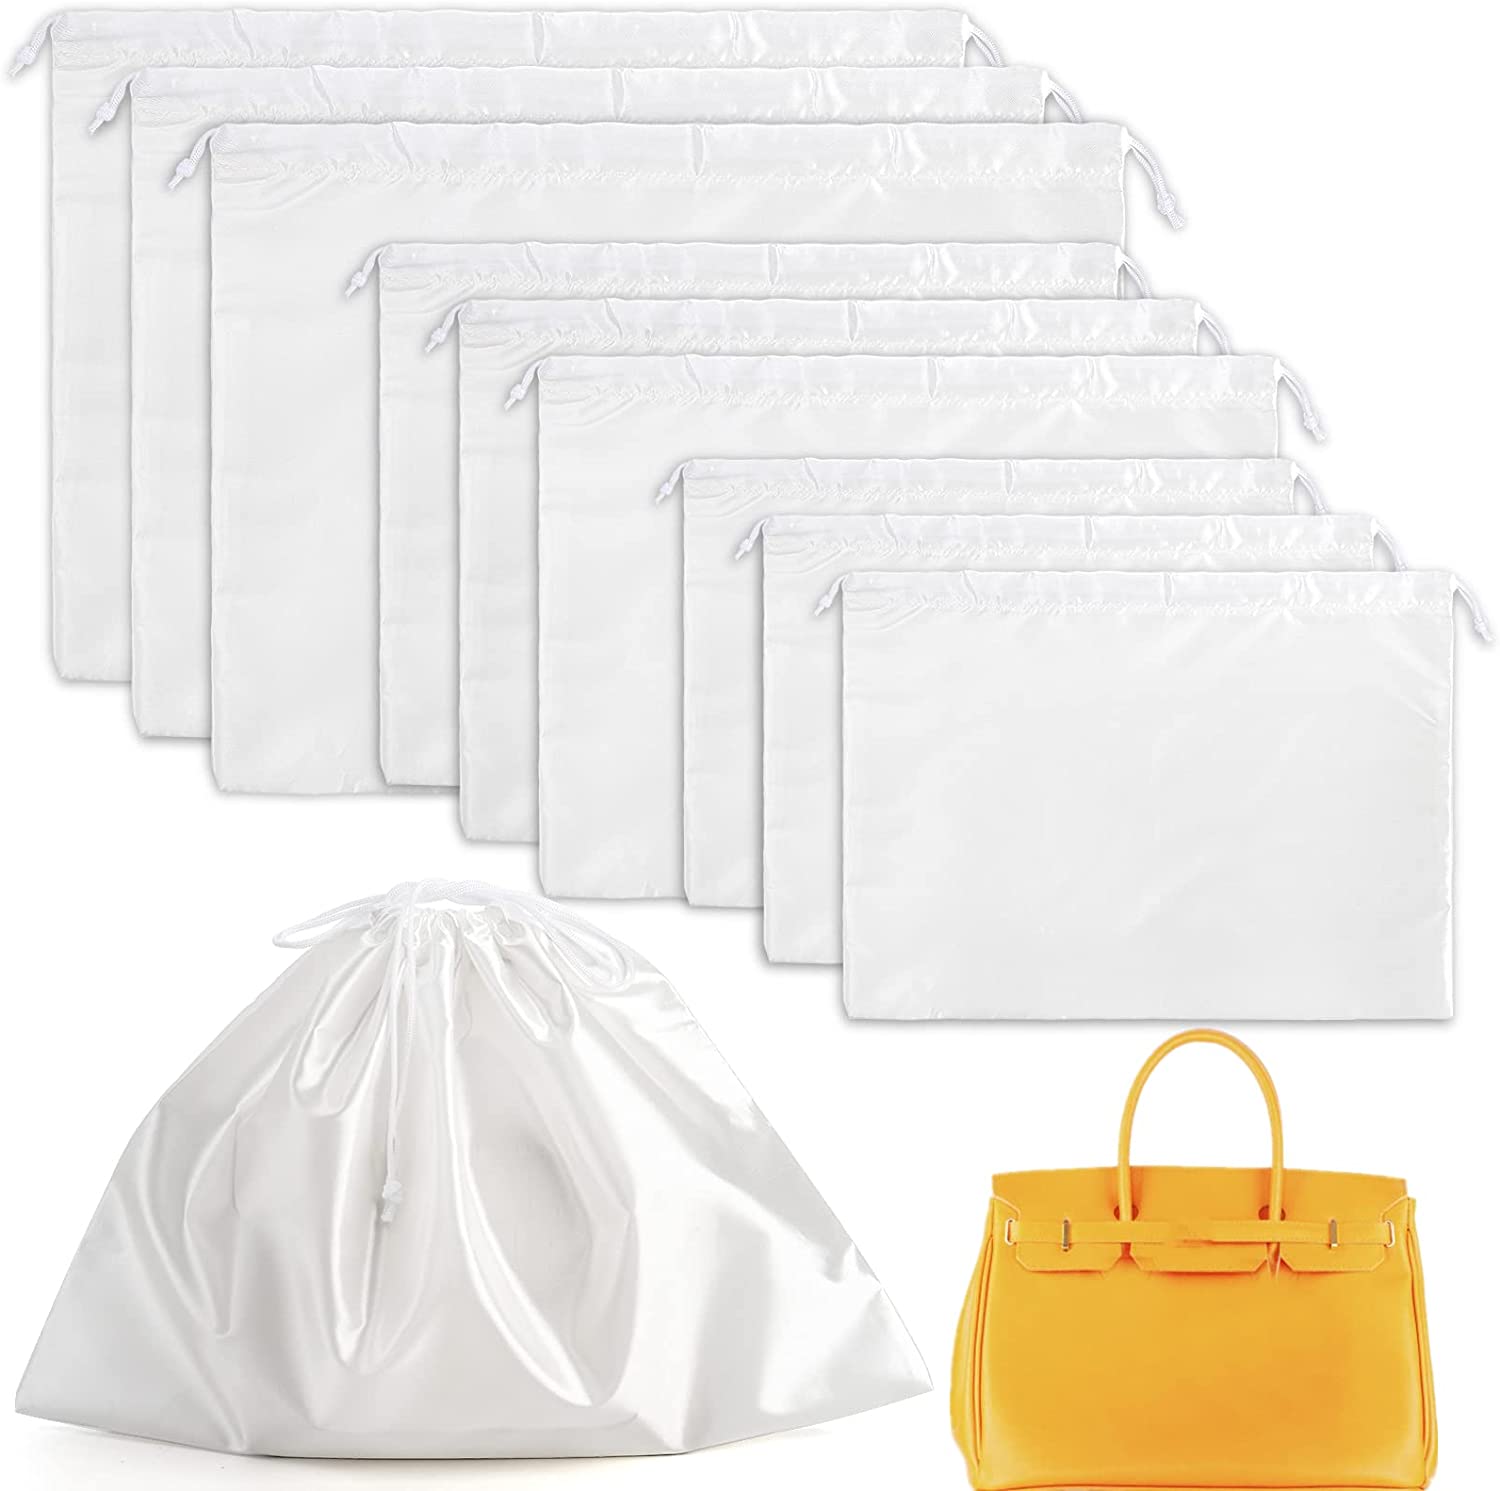 Drawstring Dust Covers WholeSale - Price List, Bulk Buy at